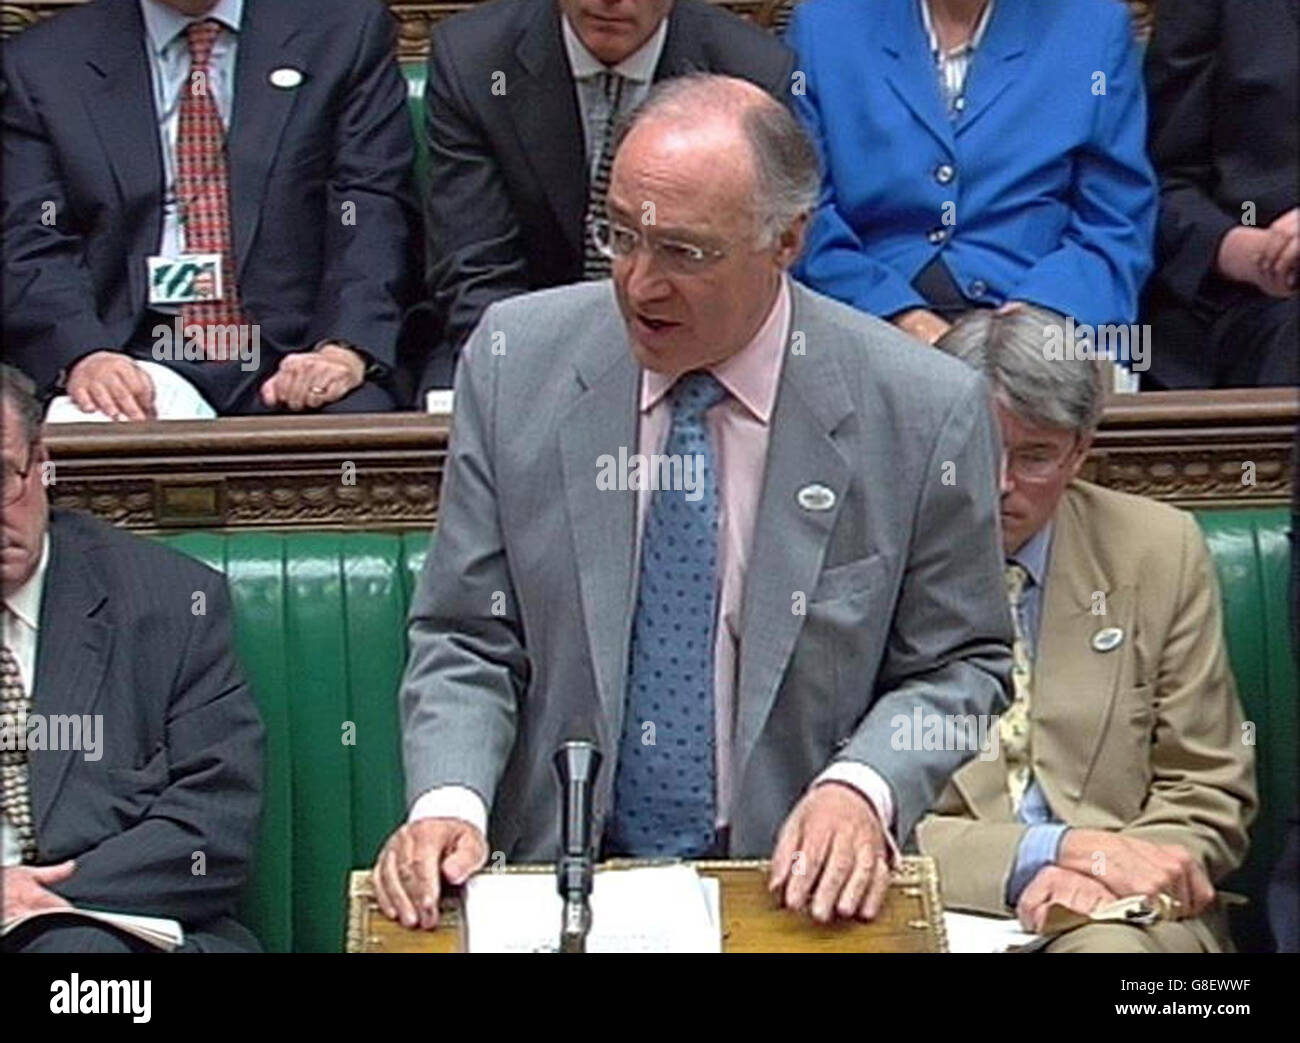 Prime Minister's Questions - House of Commons. Conservative Party leader Michael Howard. Stock Photo